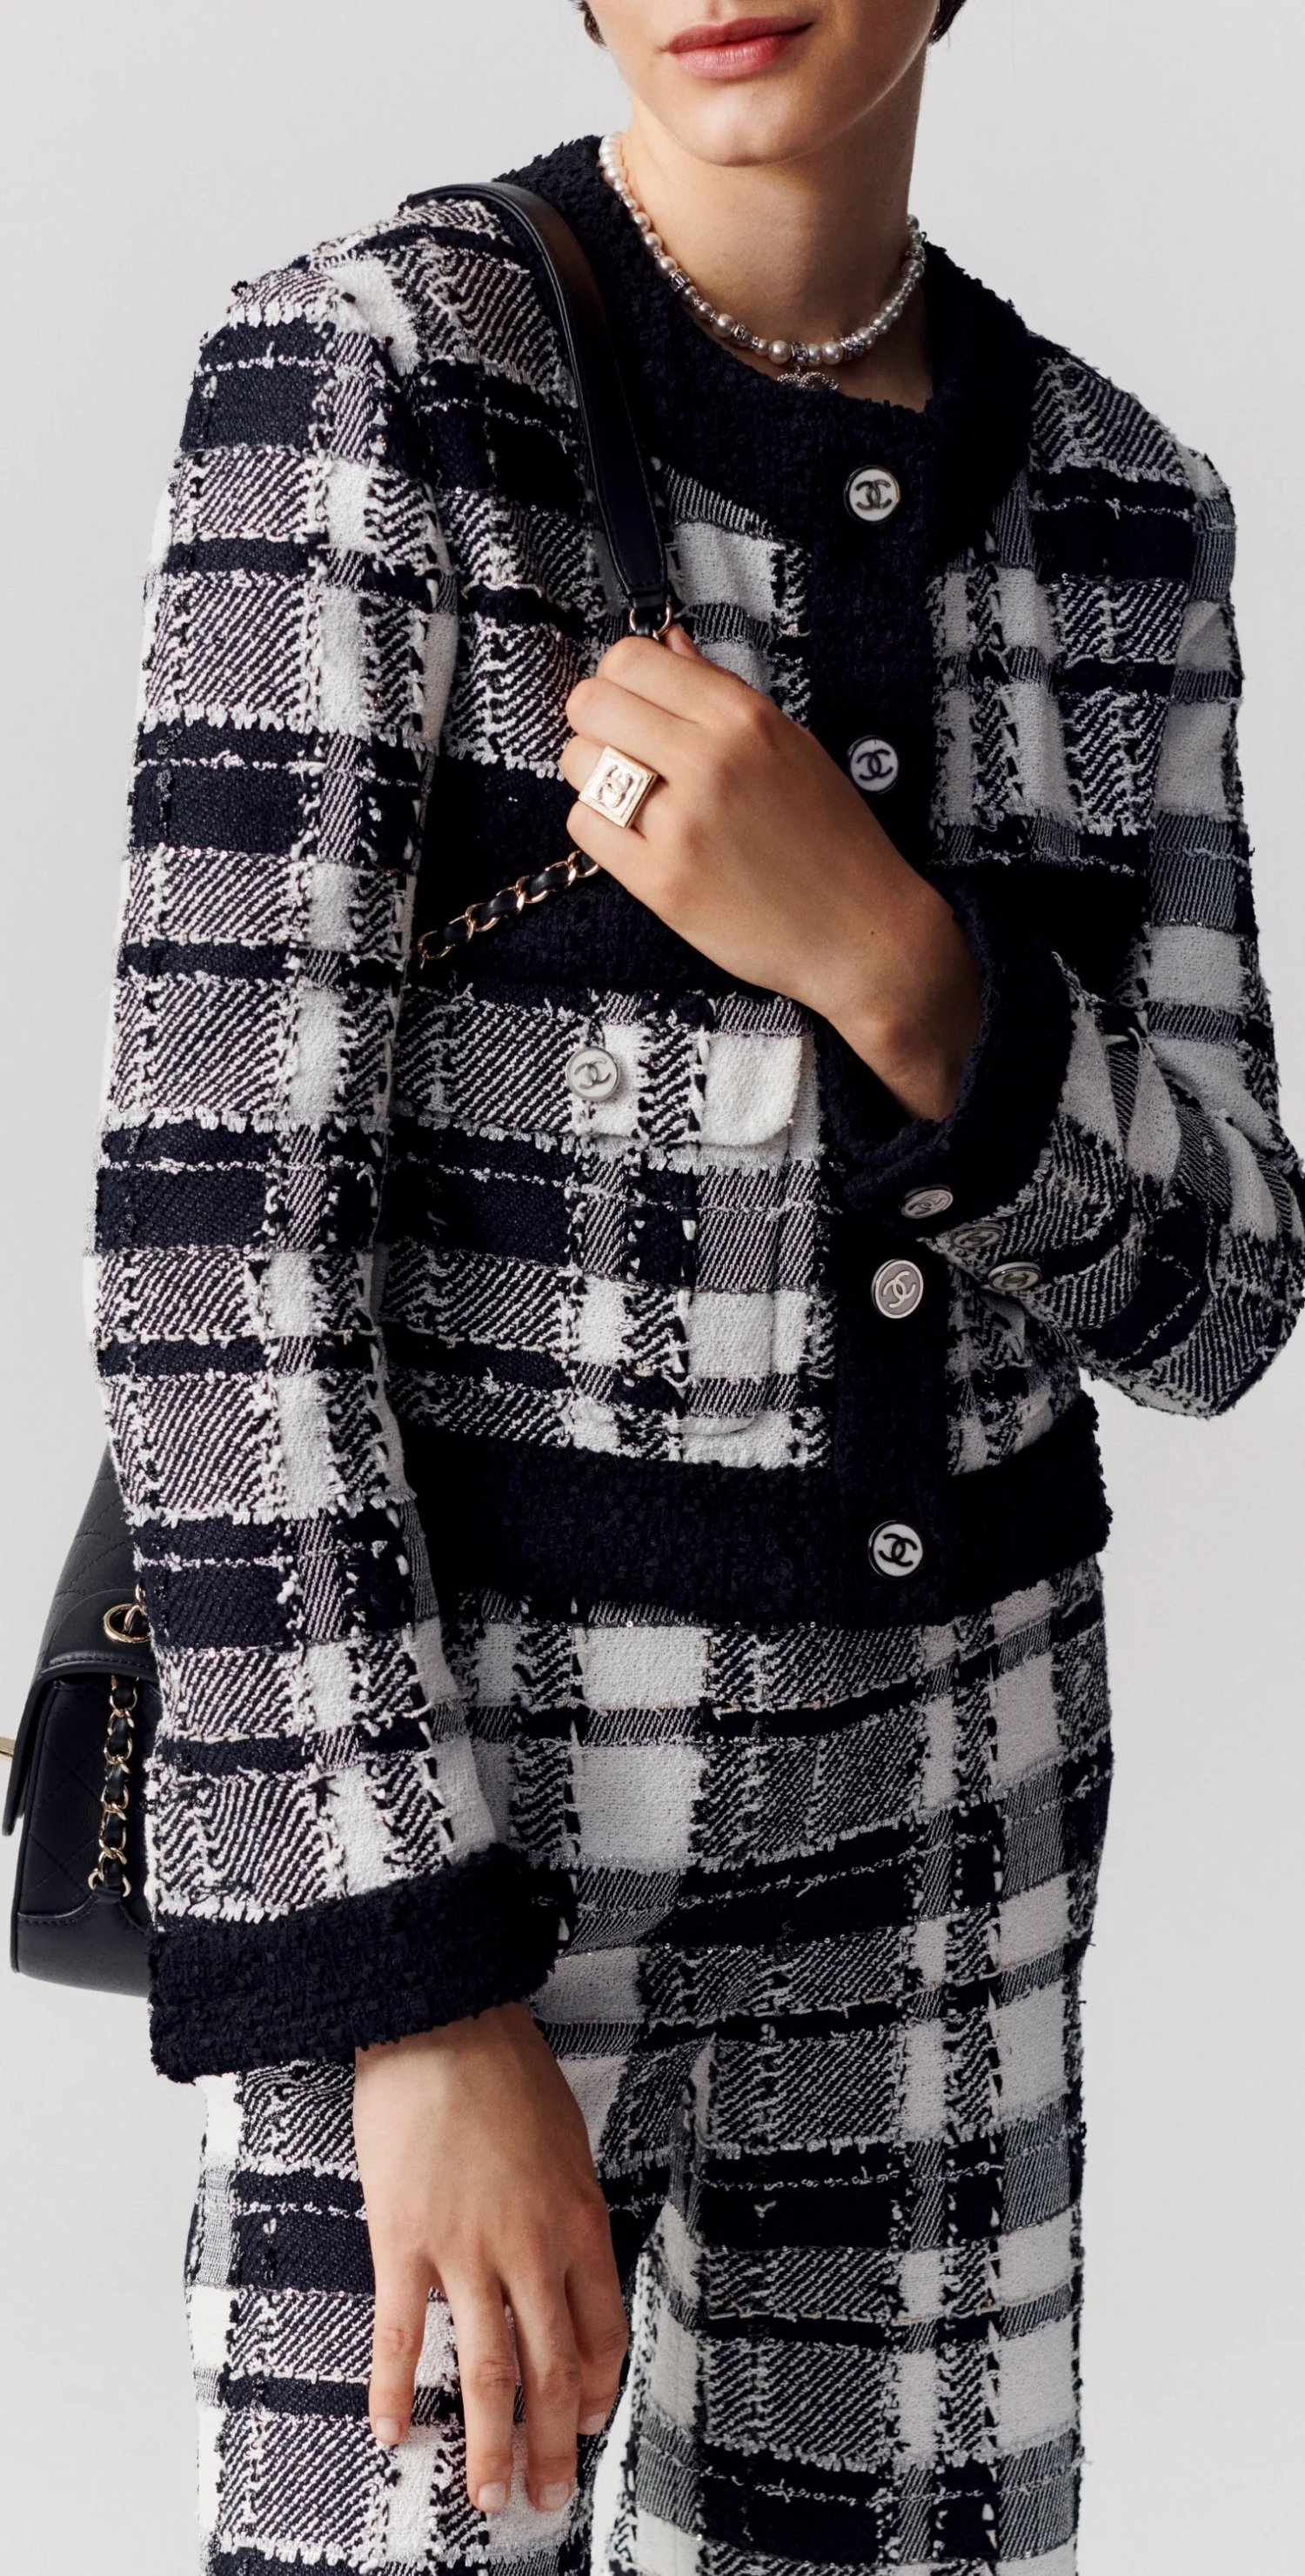 Chanel Tweed Check Jacket in Black, White, Gold & Silver — UFO No More